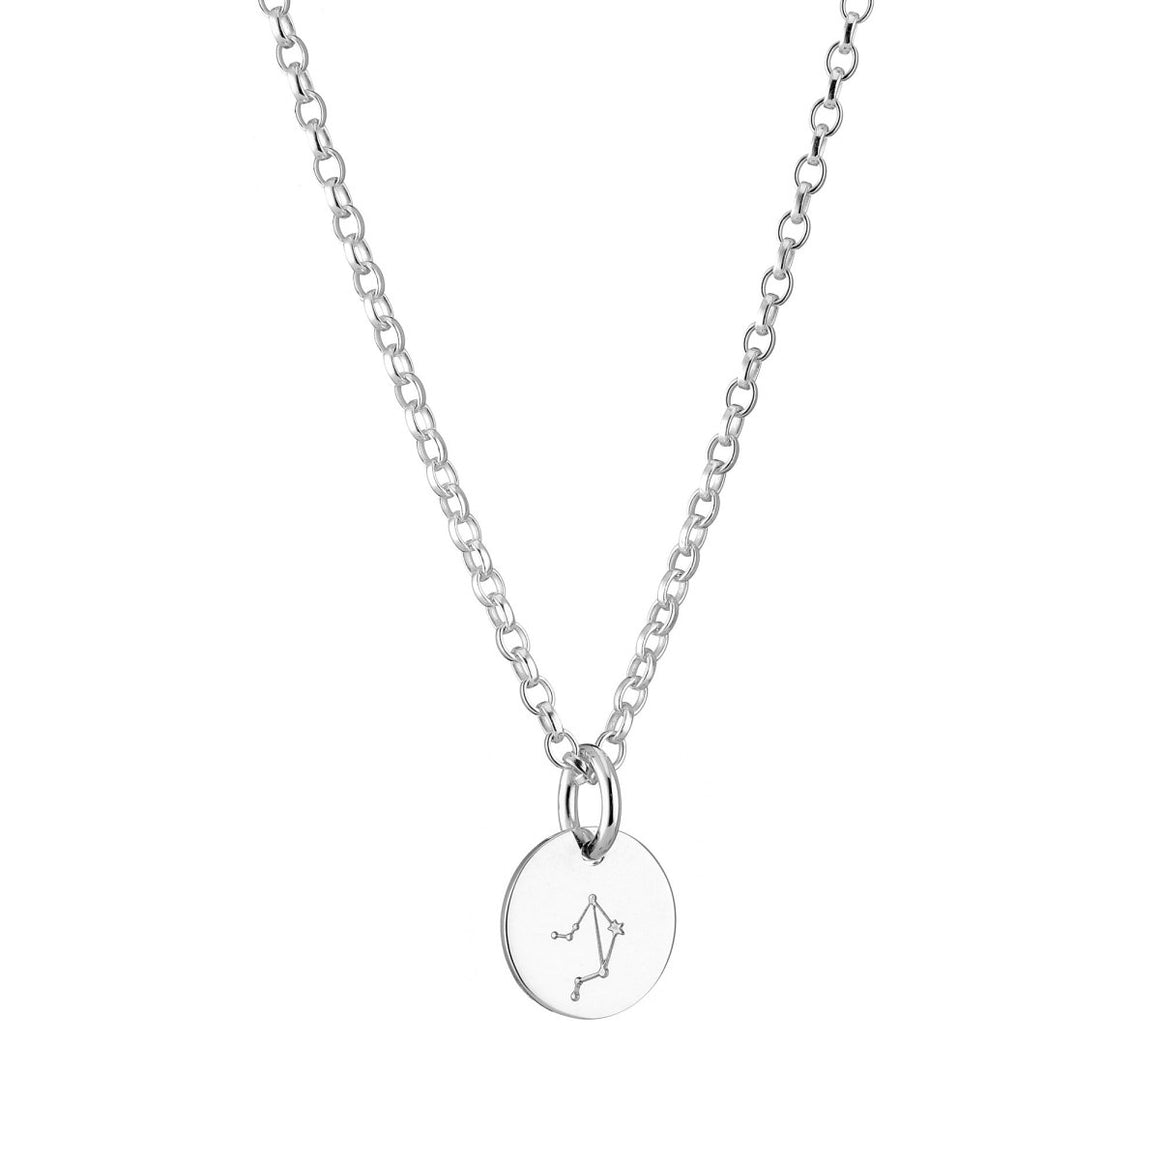 Minimalist North Star Necklace Jewelry Pendant 925 Sterling Silver With  Chain at Rs 2602.99 | पेंडेंट हार, पेंडेंट नेकलेस - My Online Collection  Store, Bengaluru | ID: 25959682255